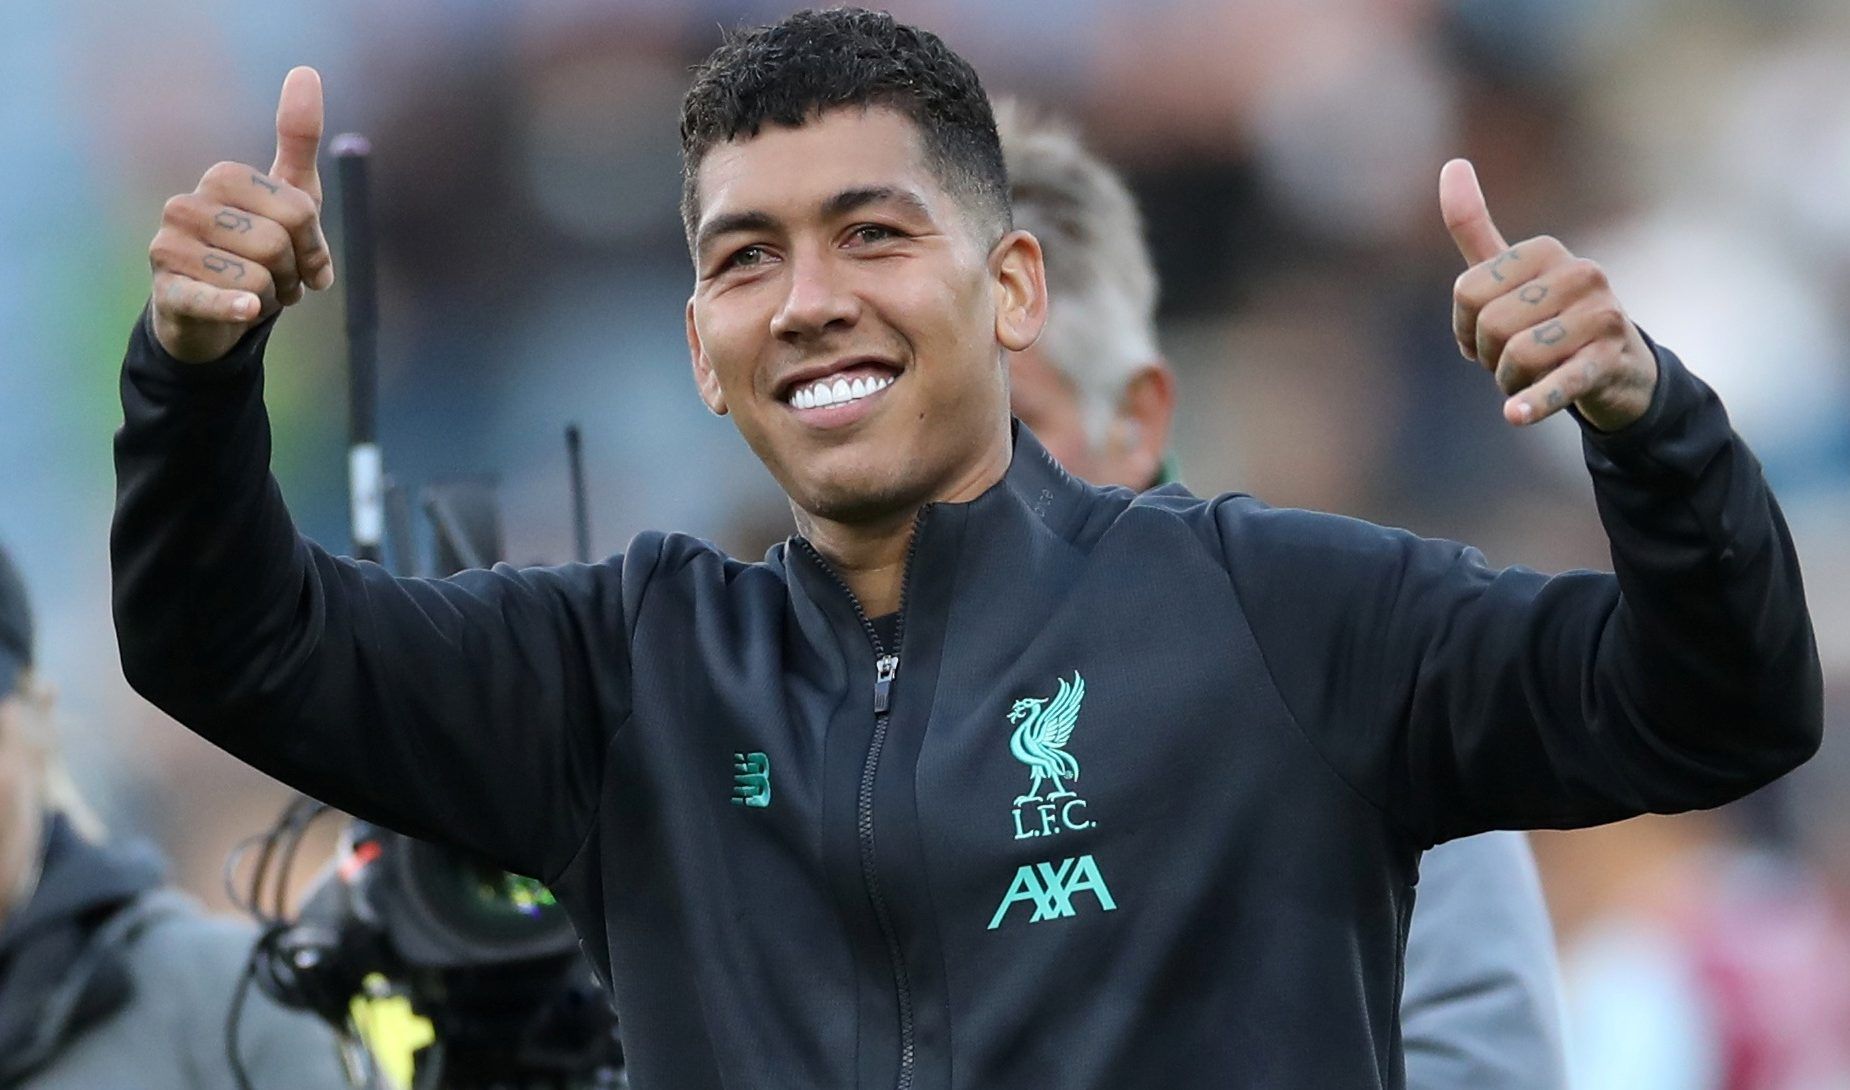 Soccer Football - Premier League - Burnley v Liverpool - Turf Moor, Burnley, Britain - August 31, 2019  Liverpool's Roberto Firmino celebrates after the match   Action Images via Reuters/Carl Recine  EDITORIAL USE ONLY. No use with unauthorized audio, video, data, fixture lists, club/league logos or 